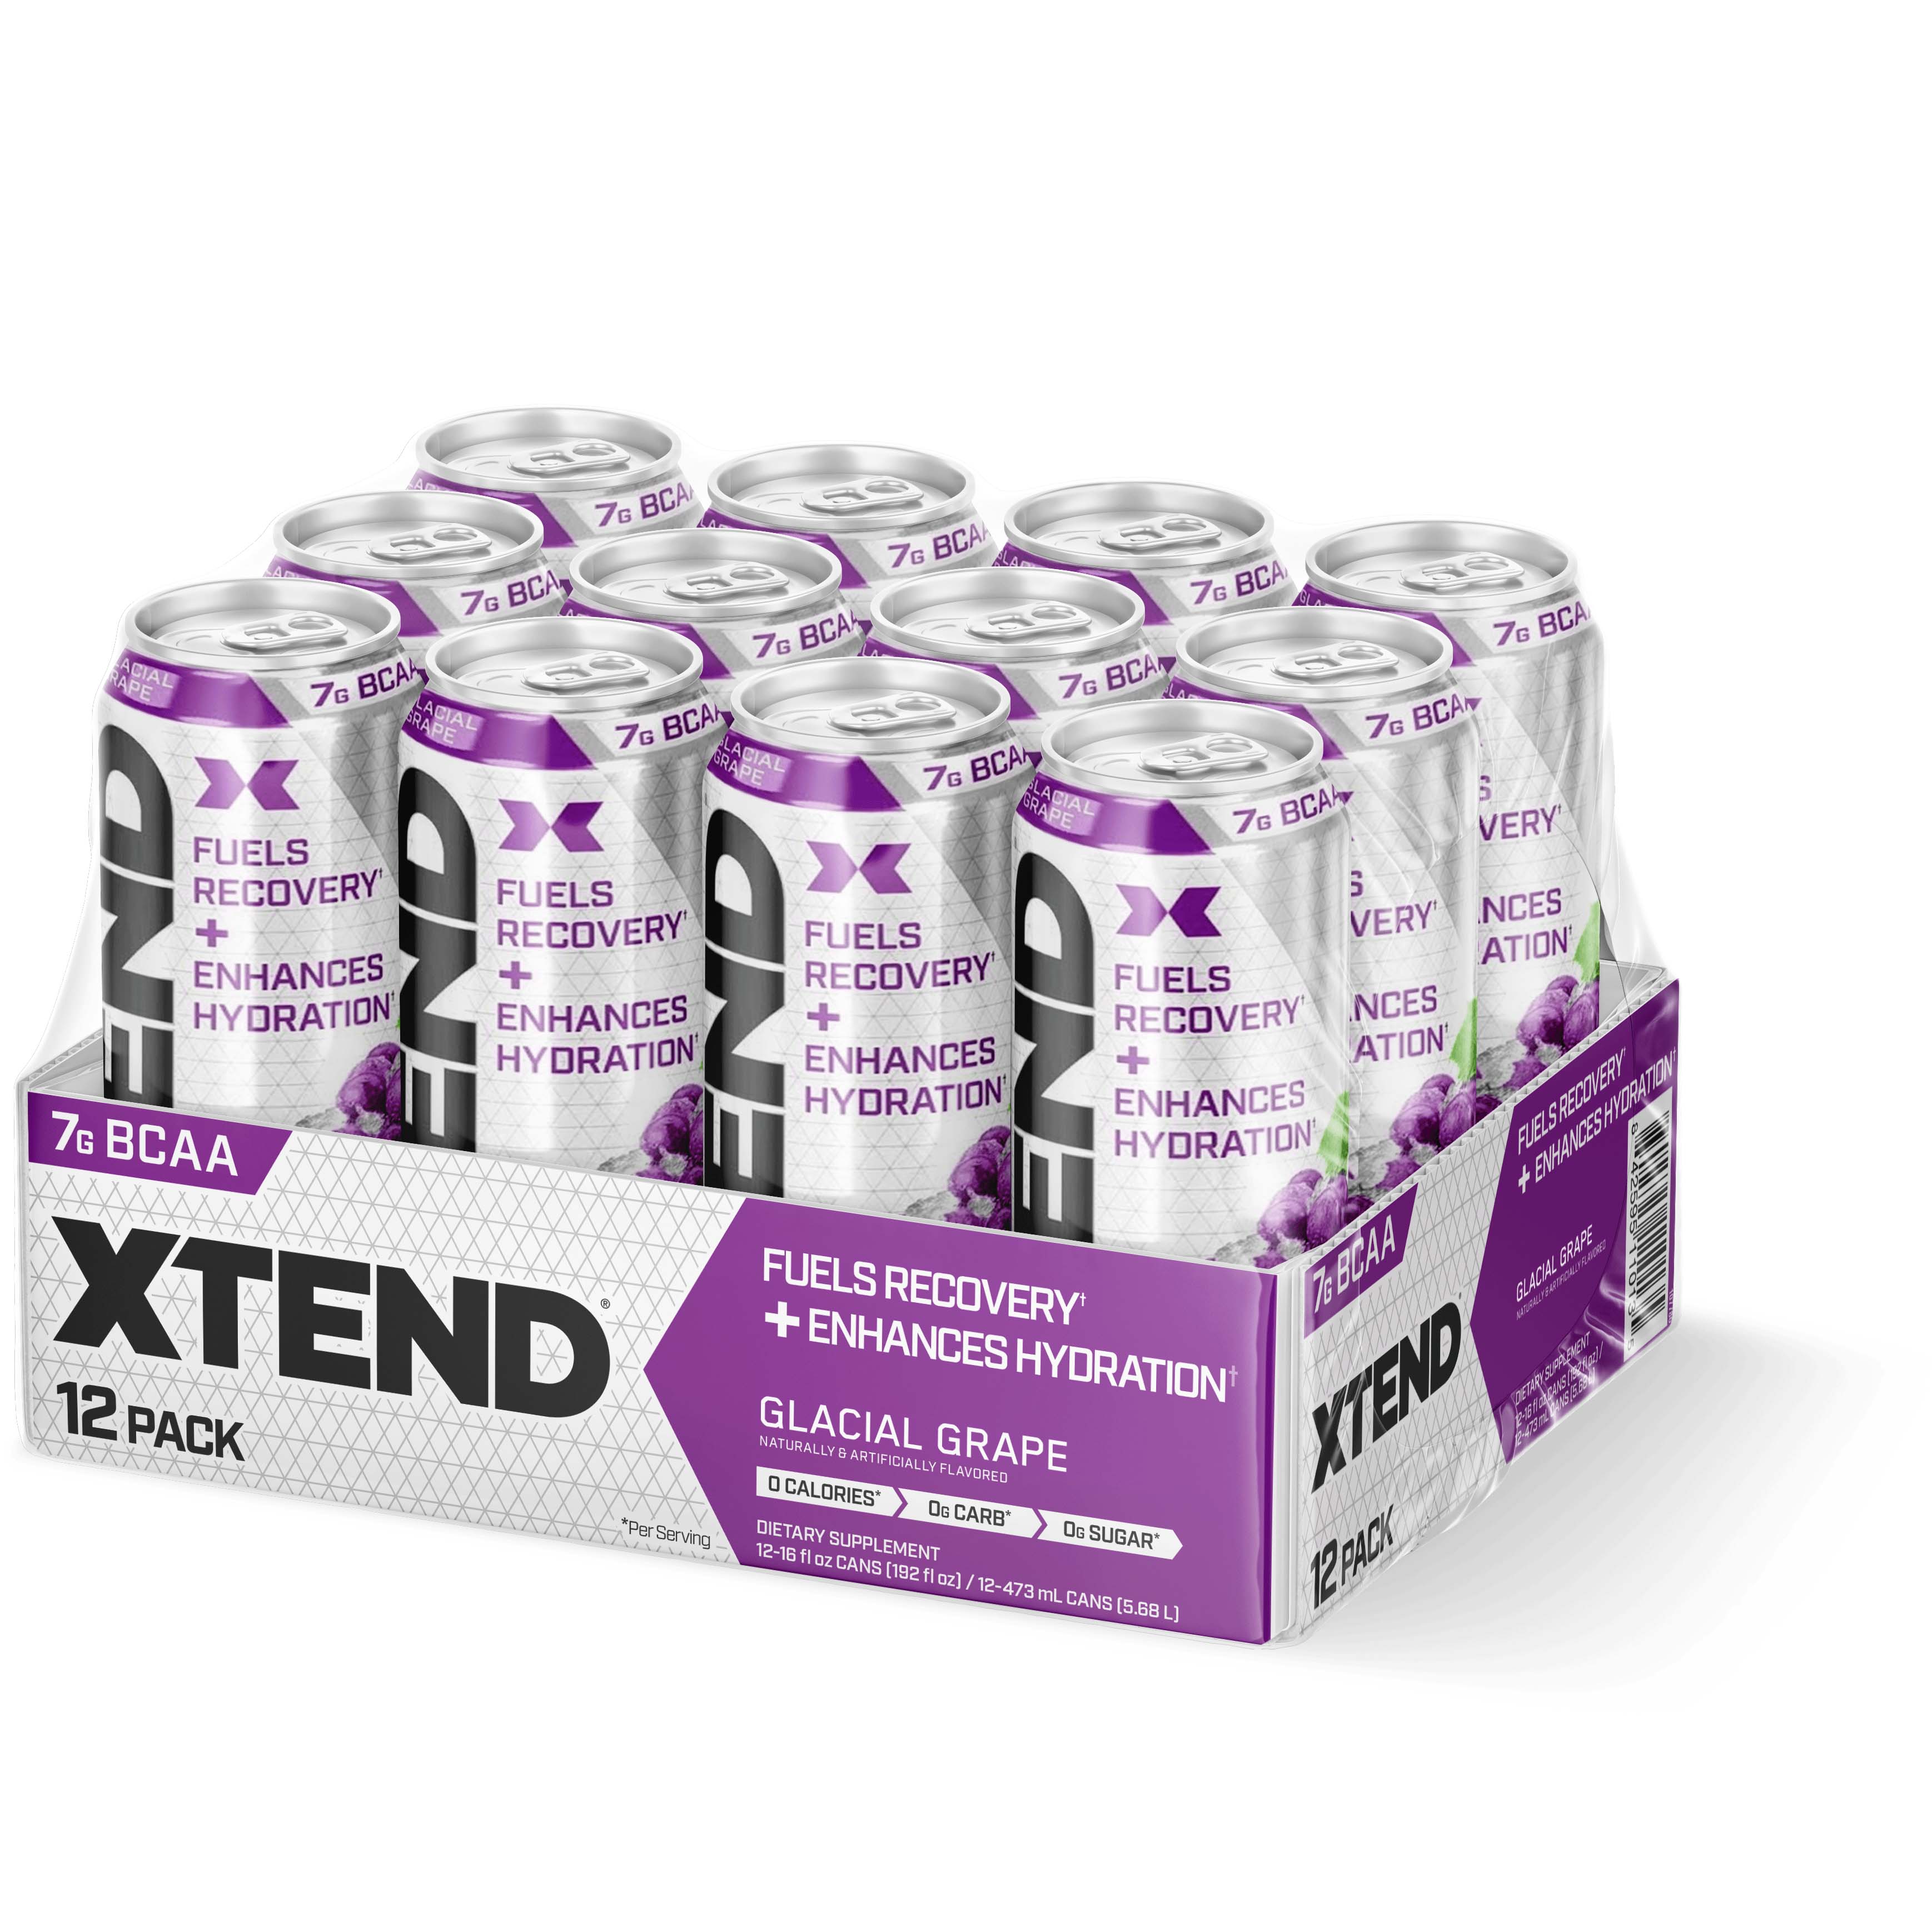 Xtend Carbonated Zero Sugar Hydration & Recovery Drink, Glacial Grape, Box of 12 Pieces